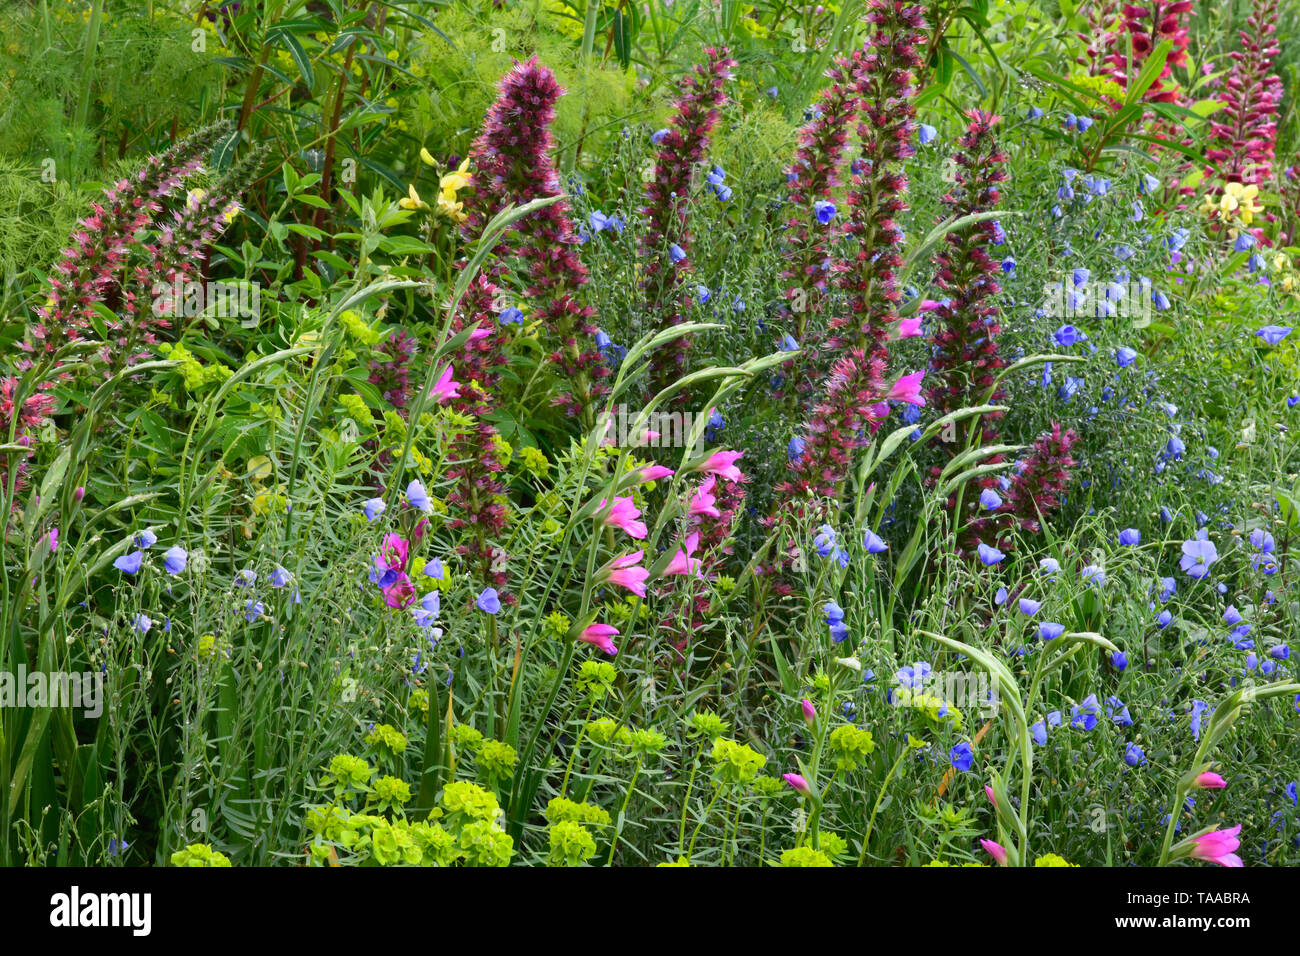 Echium russicum, Gladiolus communis subsp byzantinus and Euphorbia palustris in the Resilience Garden designed by Sarah Eberle at the RHS Chelsea Flow Stock Photo